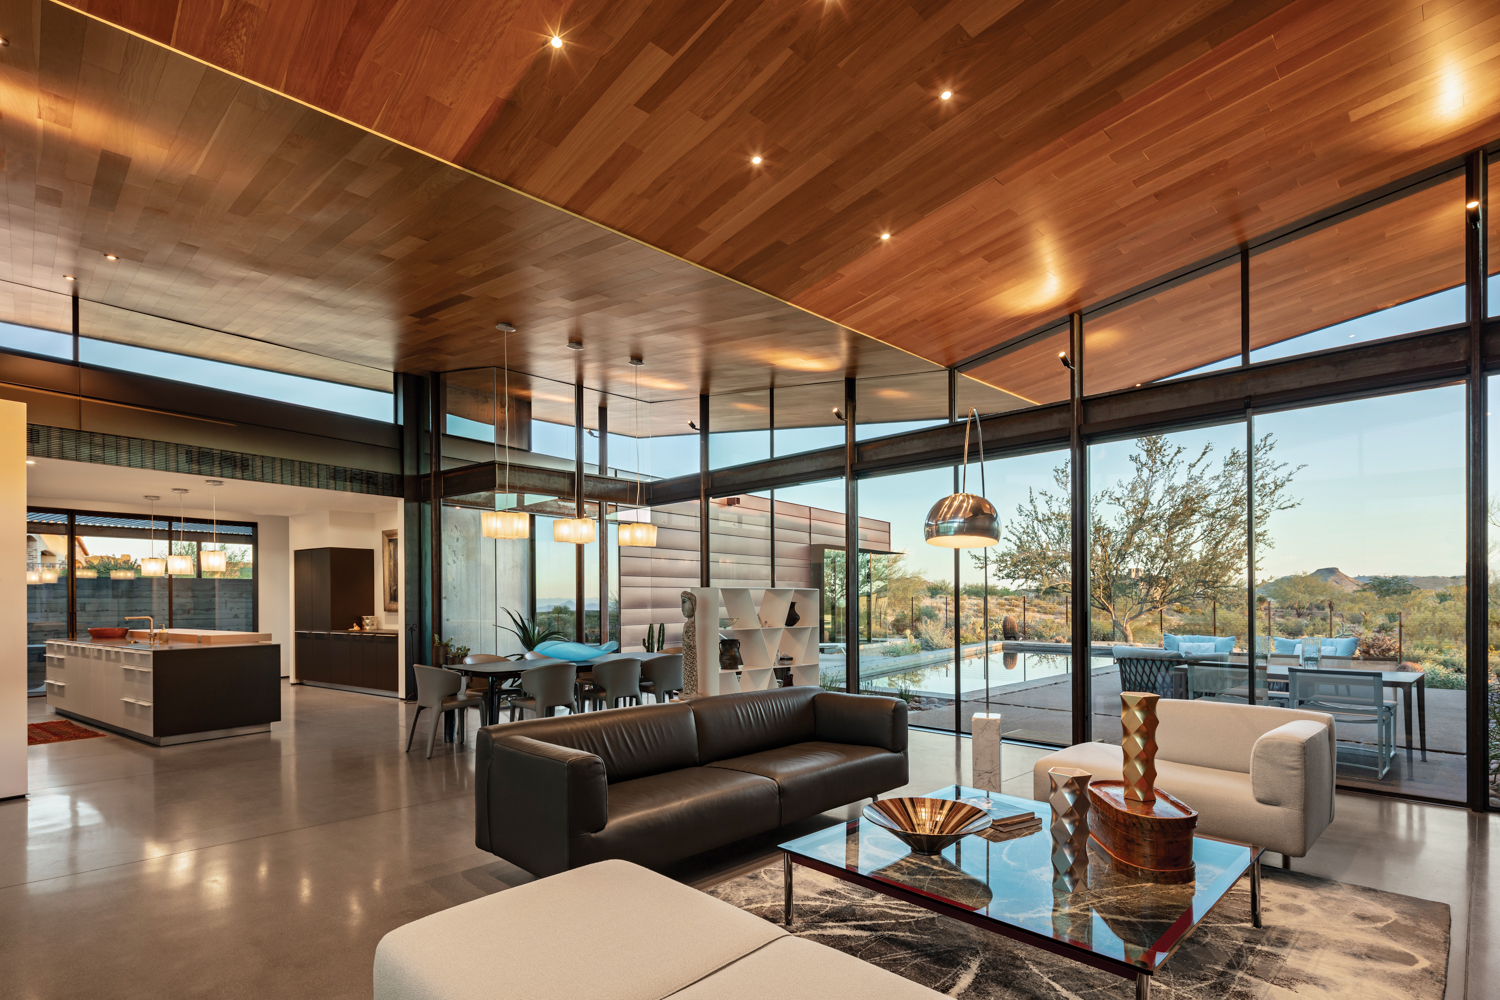 A glass-walled great room with...